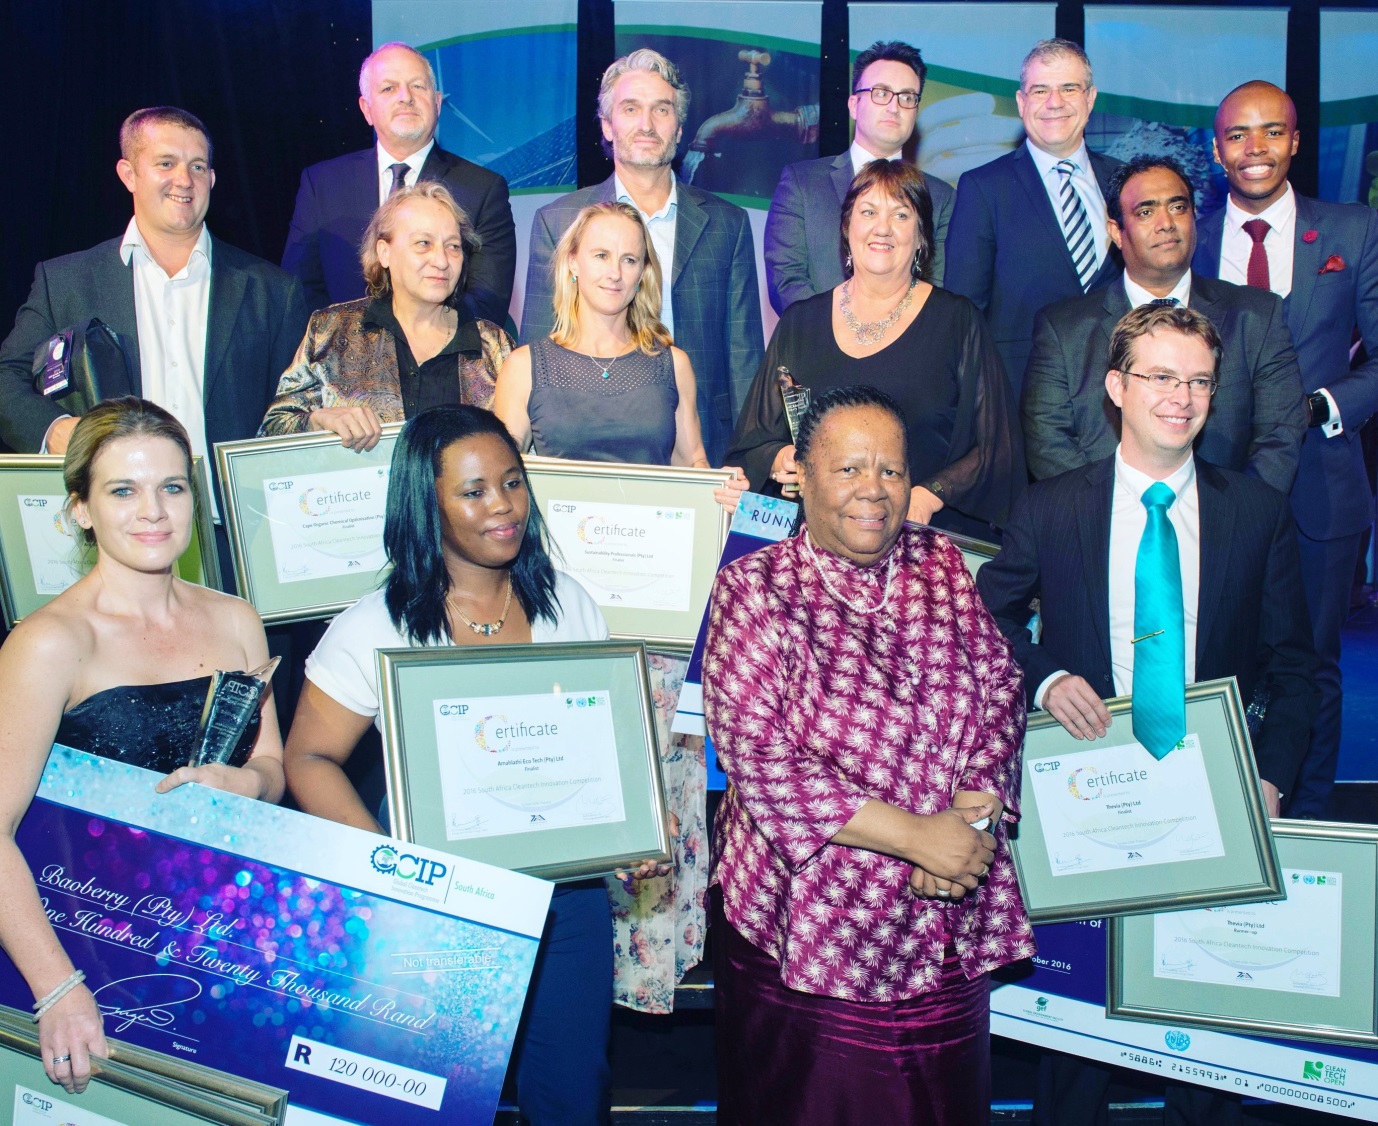 Yolandi Schoeman (front left); Naledi Pandor, Minister of Science and Technology (front centre)